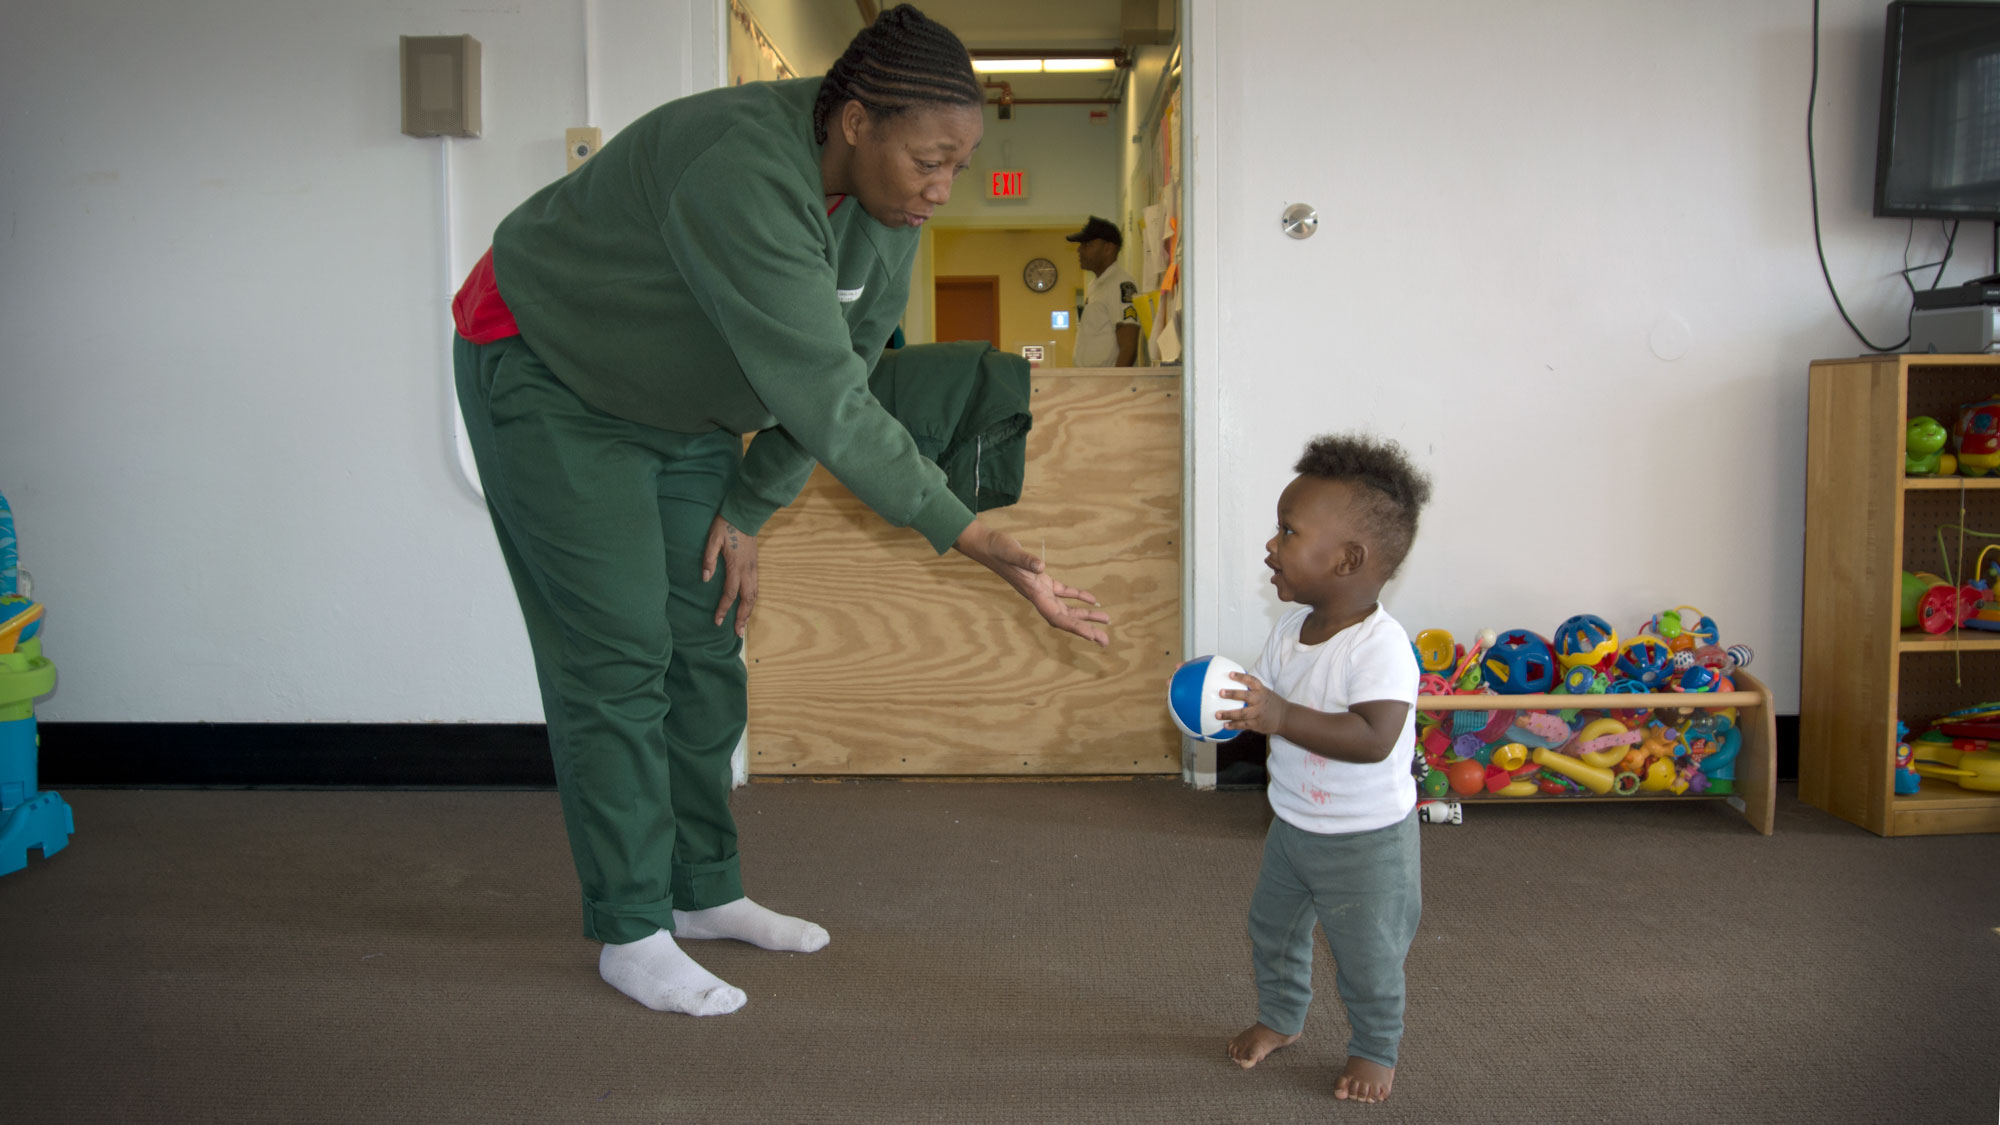 A woman holds out her hand to a toddler in a playroom. She is dressed in an olive green uniform.